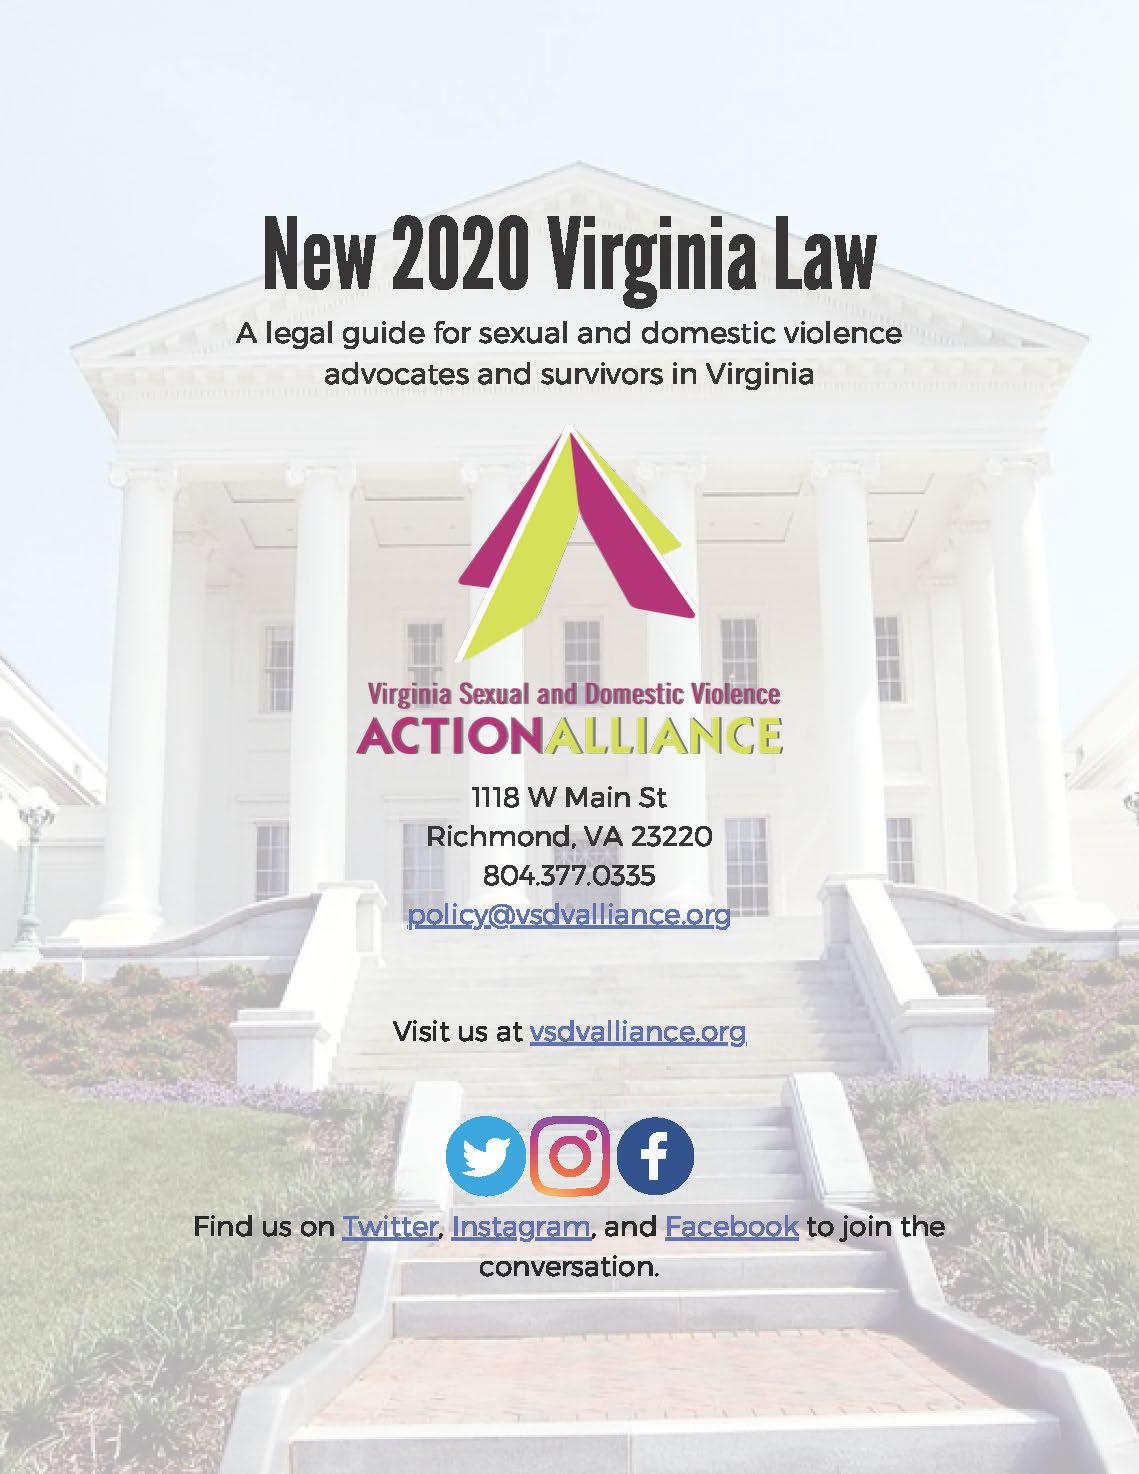 Text says "New 2020 Virginia Law: A legal guide for sexual and domestic violence advocates and survivors in Virginia" with background image of the Virginia General Assembly building's entrance.